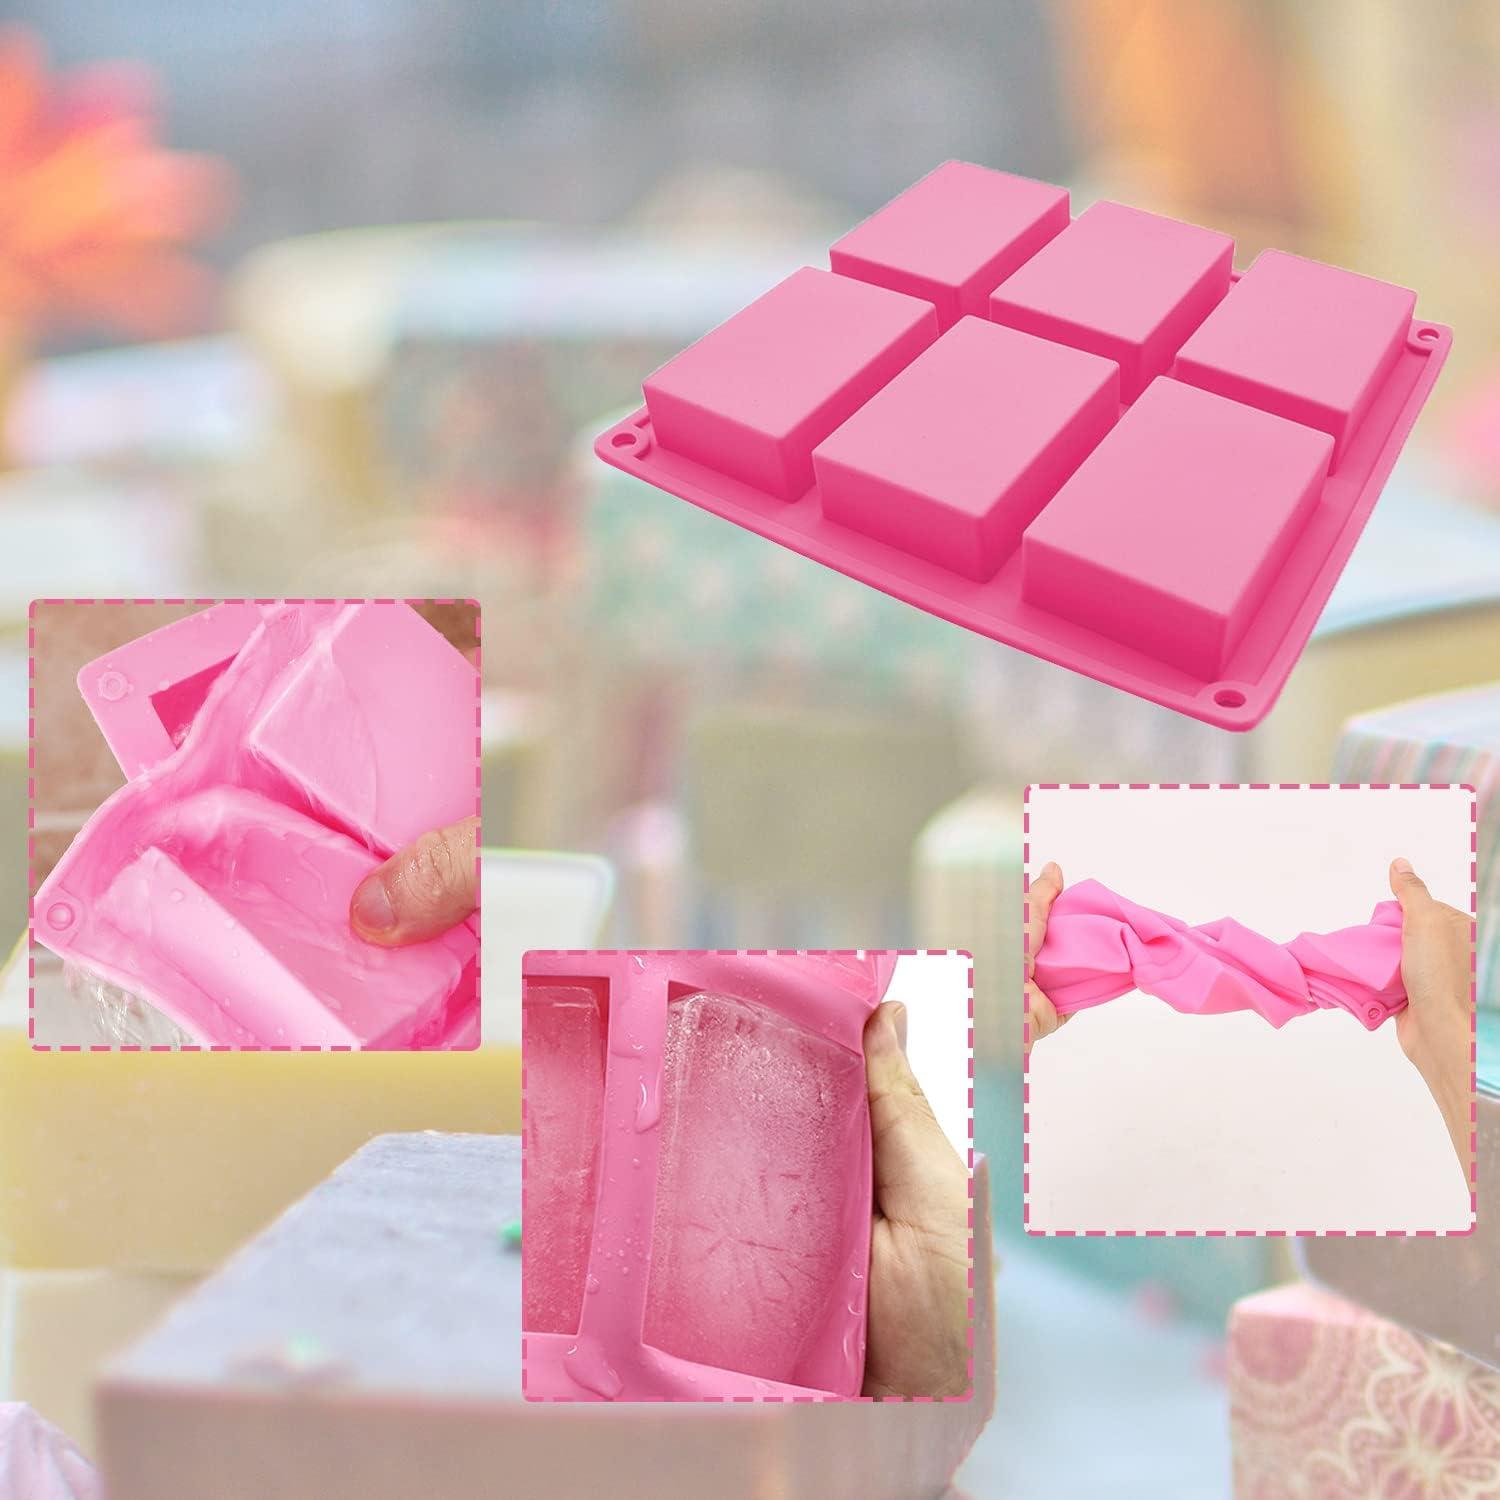 6 Cavity in Stock Pink DIY Hand Made Silicone Square Soap Mold for